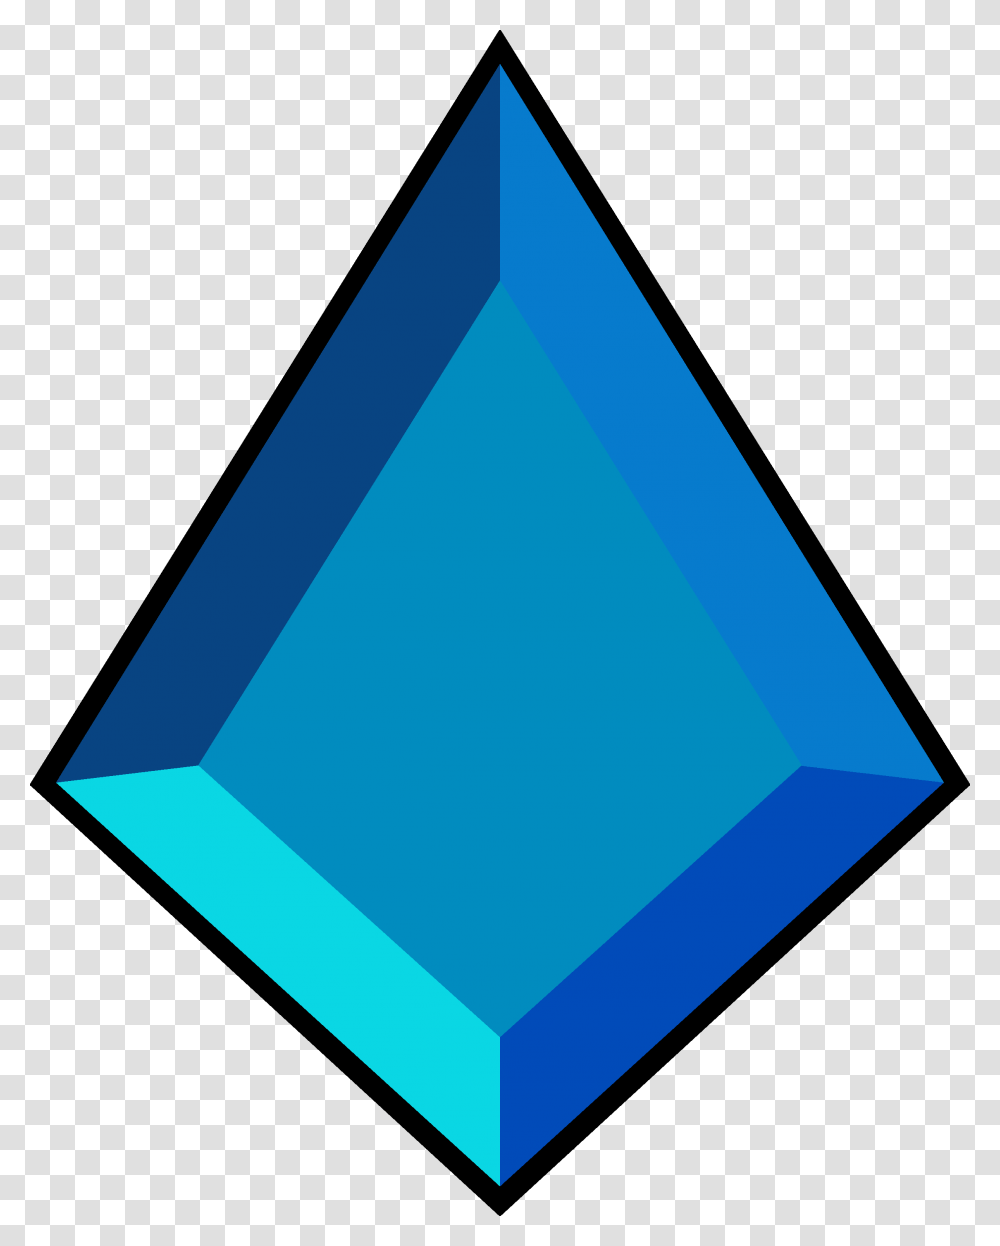 Blue Diamond S Gemstone Is Located On Her Chest Featuring Blue Diamond Steven Universe Gem, Triangle Transparent Png